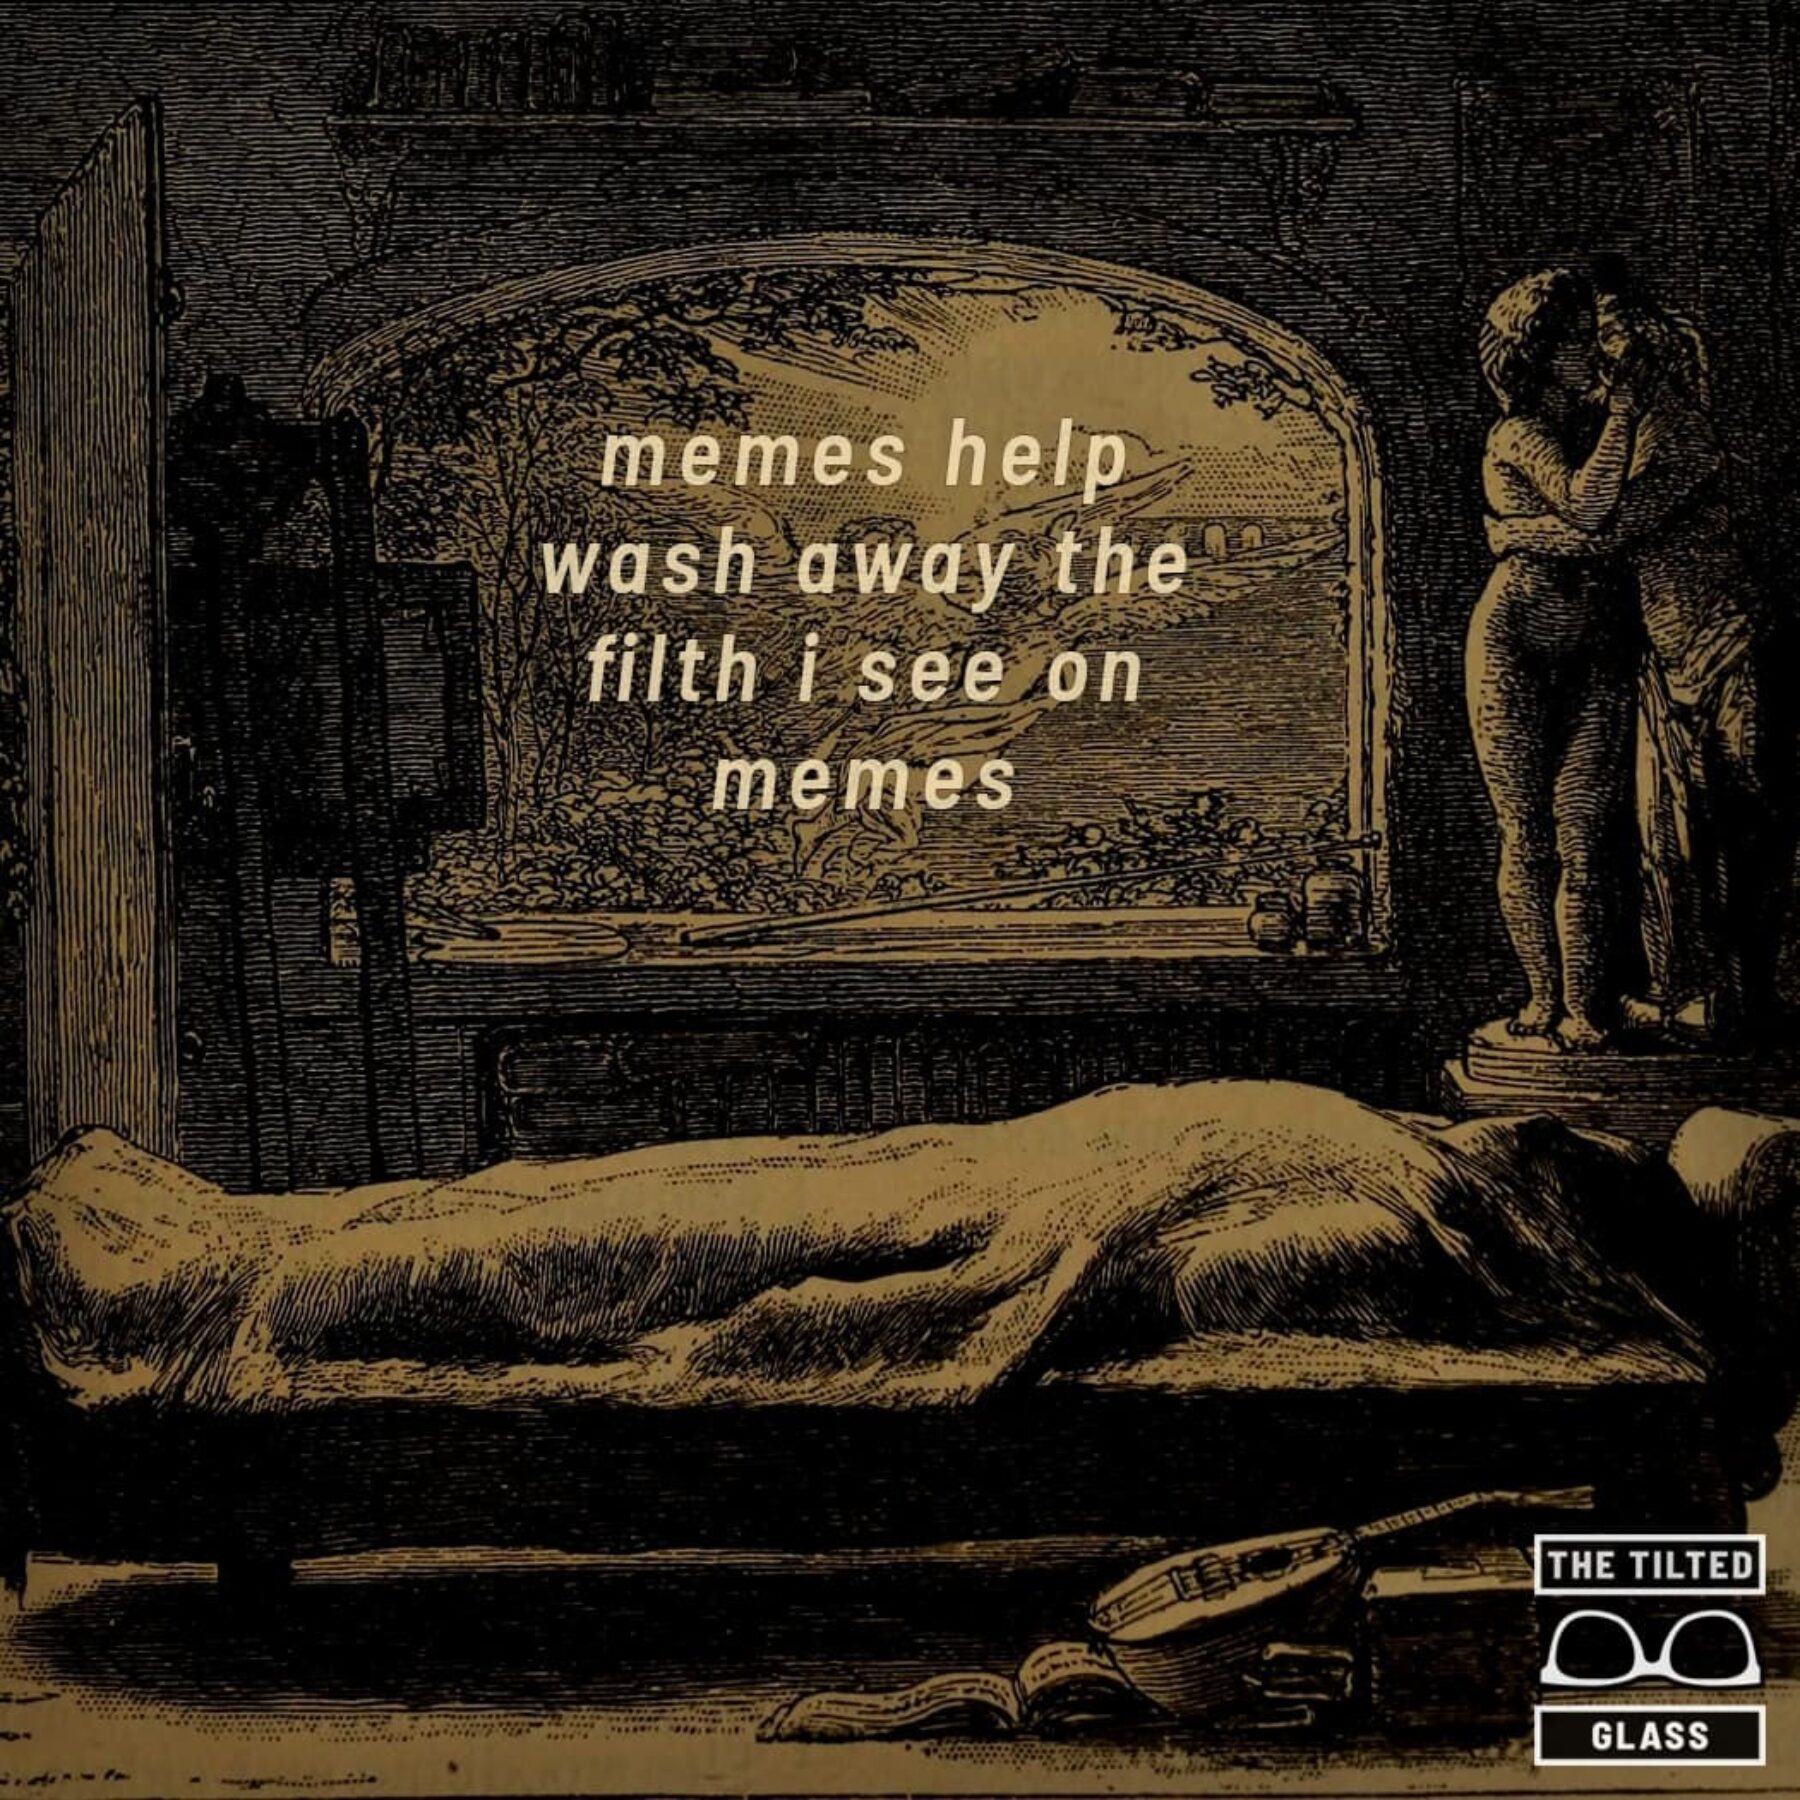 memes help wash away the filth i see on memes